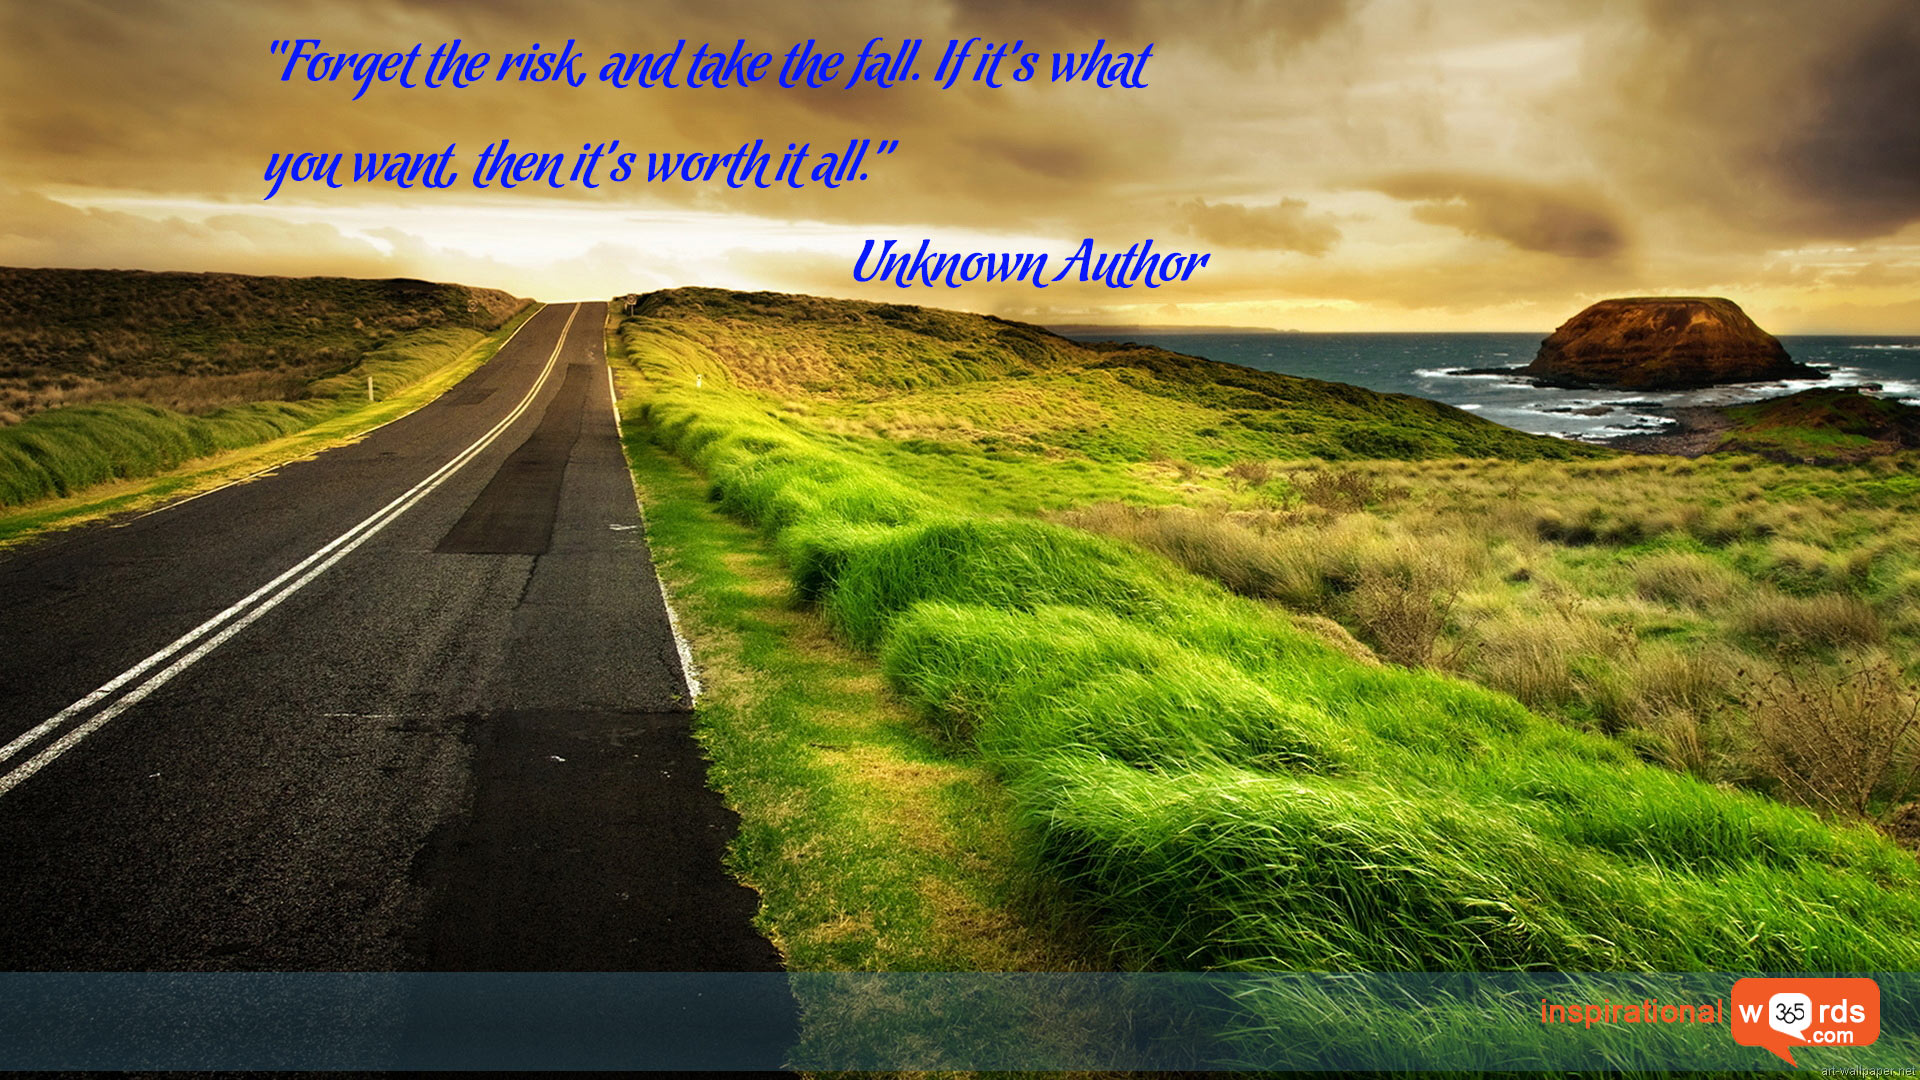 Inspirational Wallpaper Quote. Unknown Author | Inspirational Words